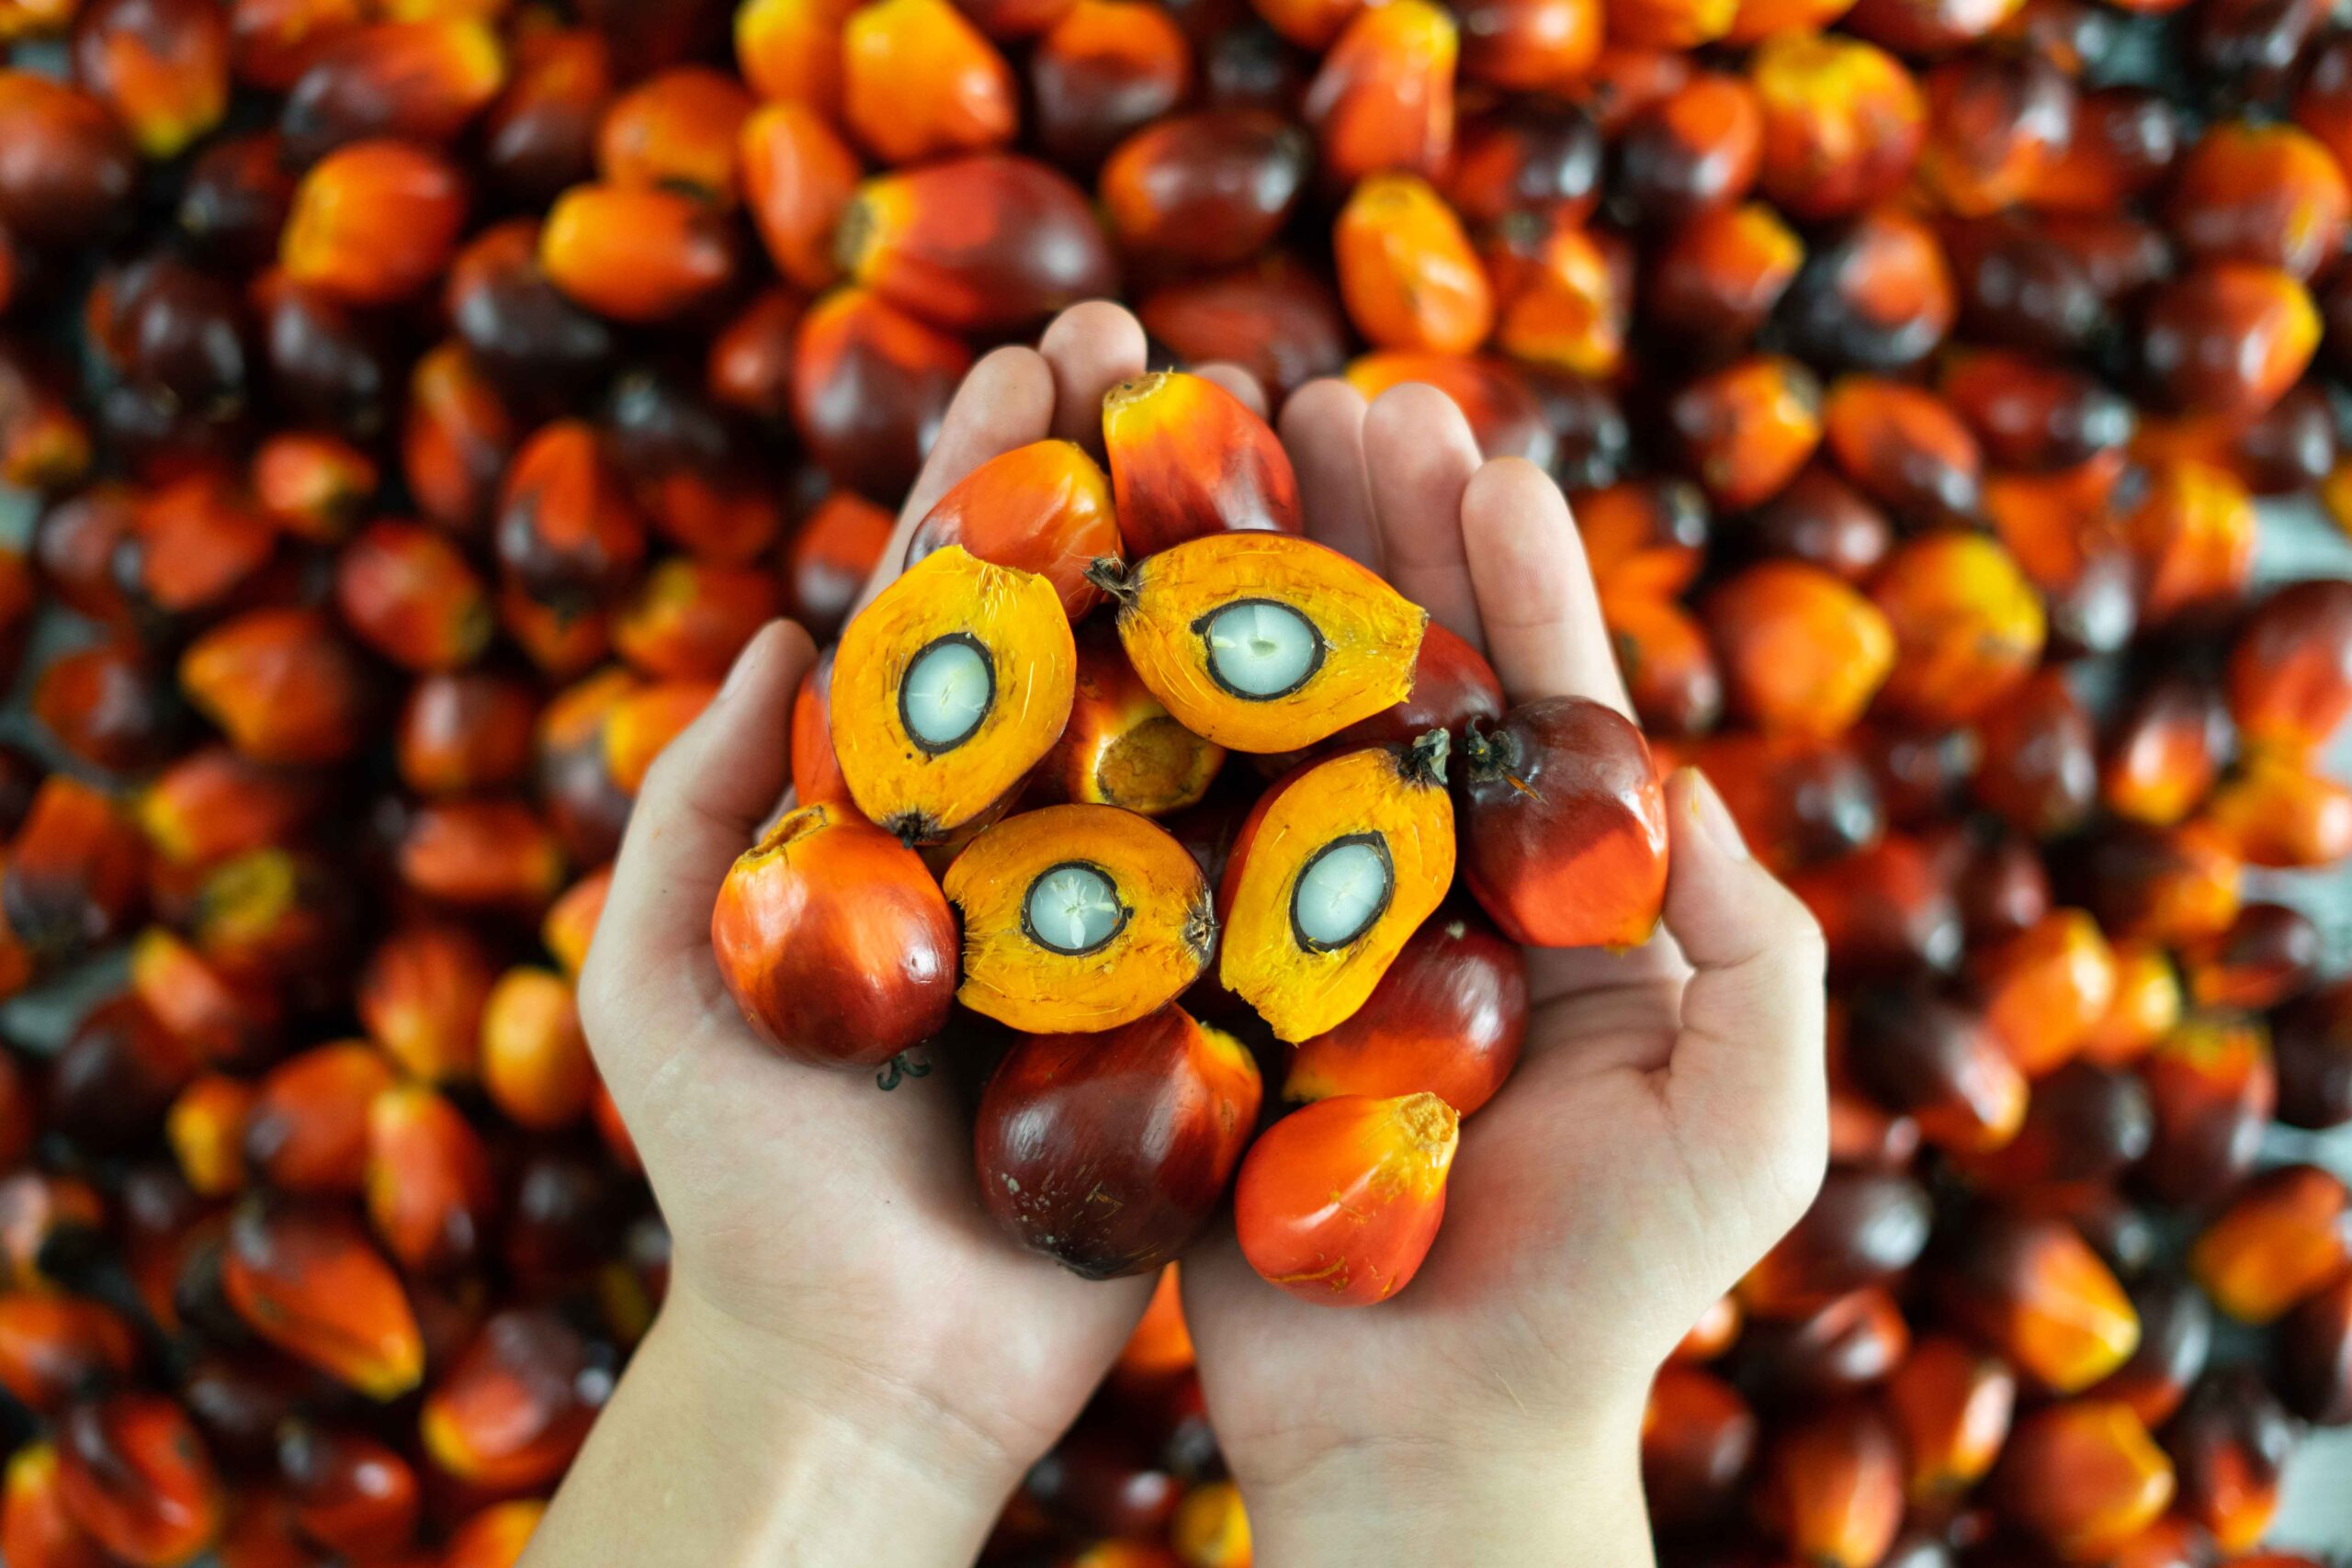 Hand holding up oil palm fruitlets and cross section